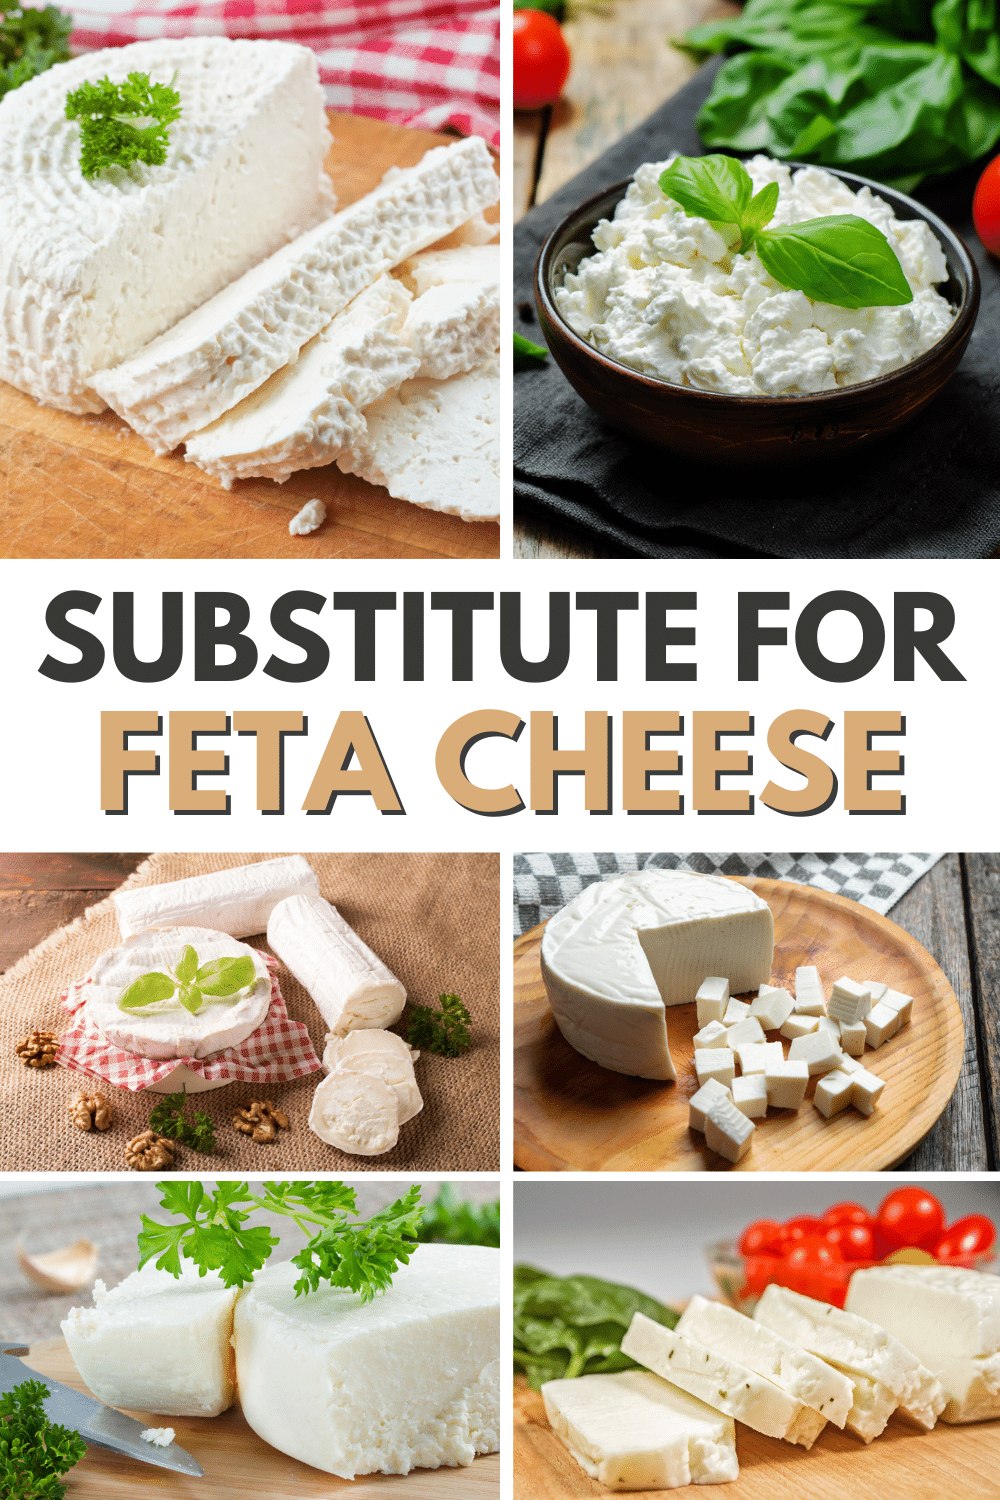 A picture collage presenting various alternatives as a substitute for feta cheese.